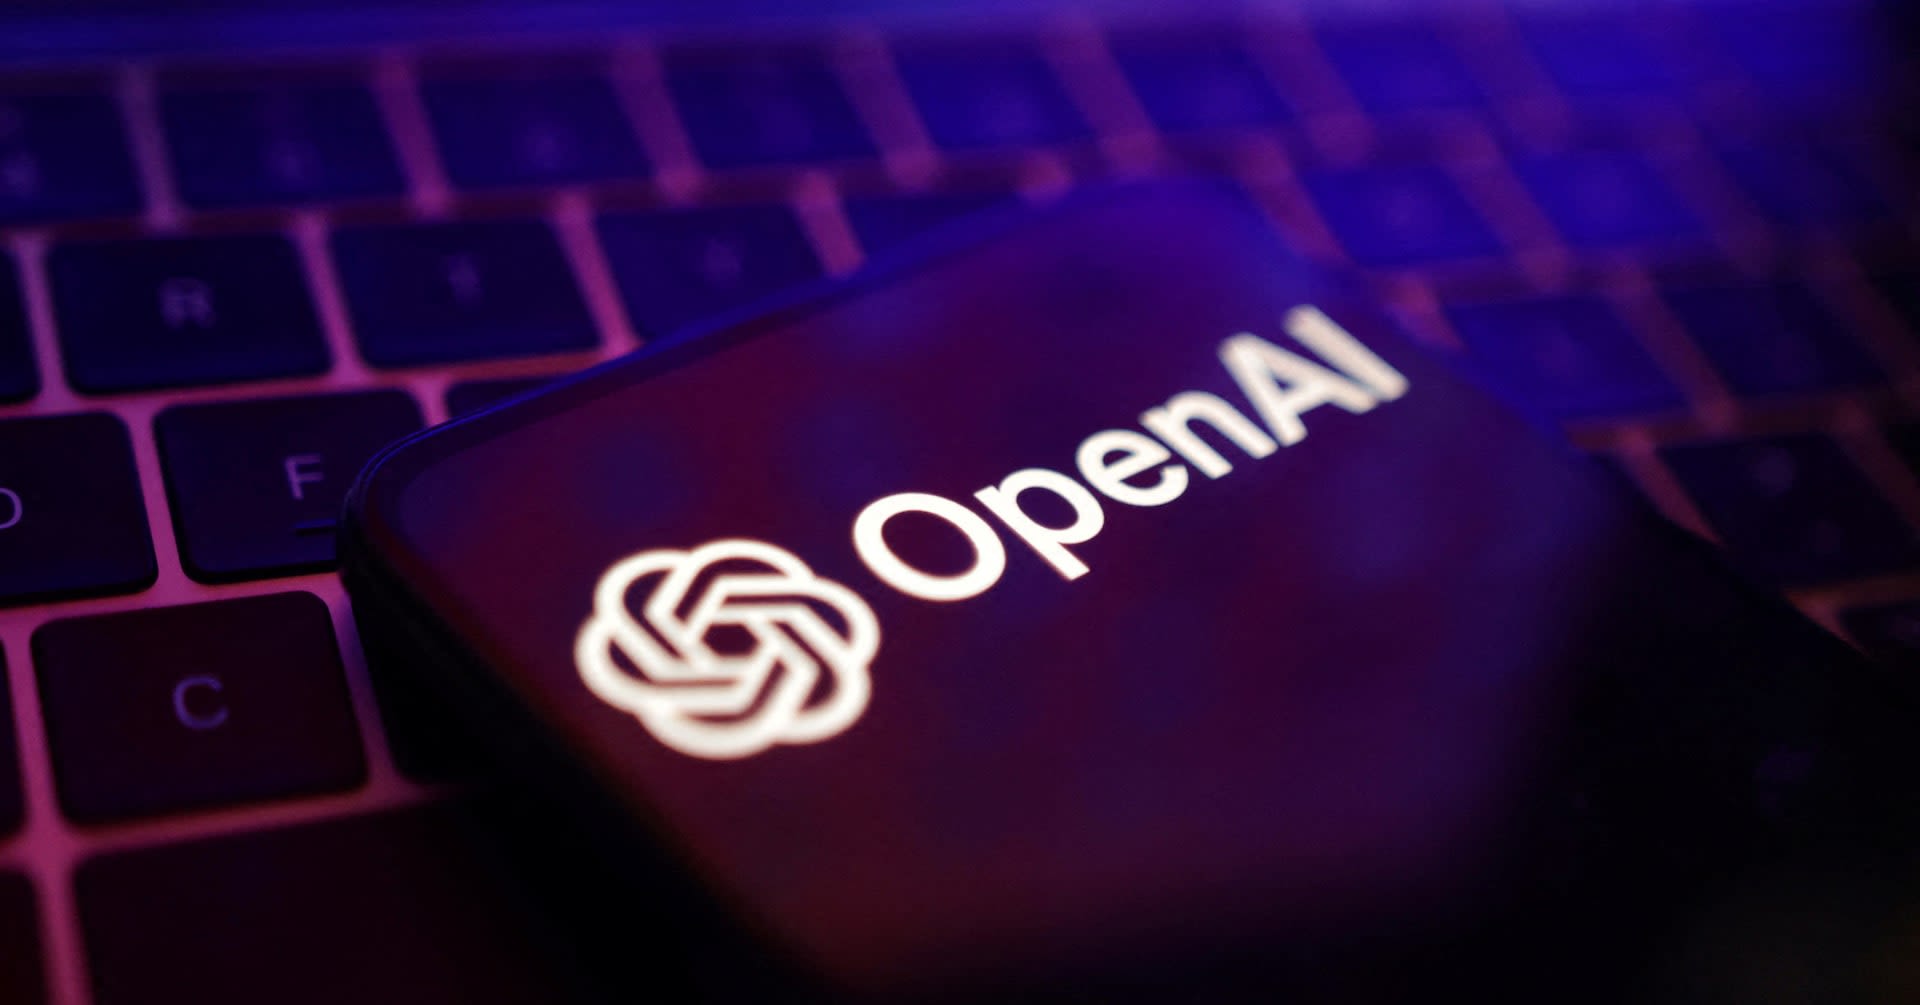 OpenAI sets up Safety and Security Committee